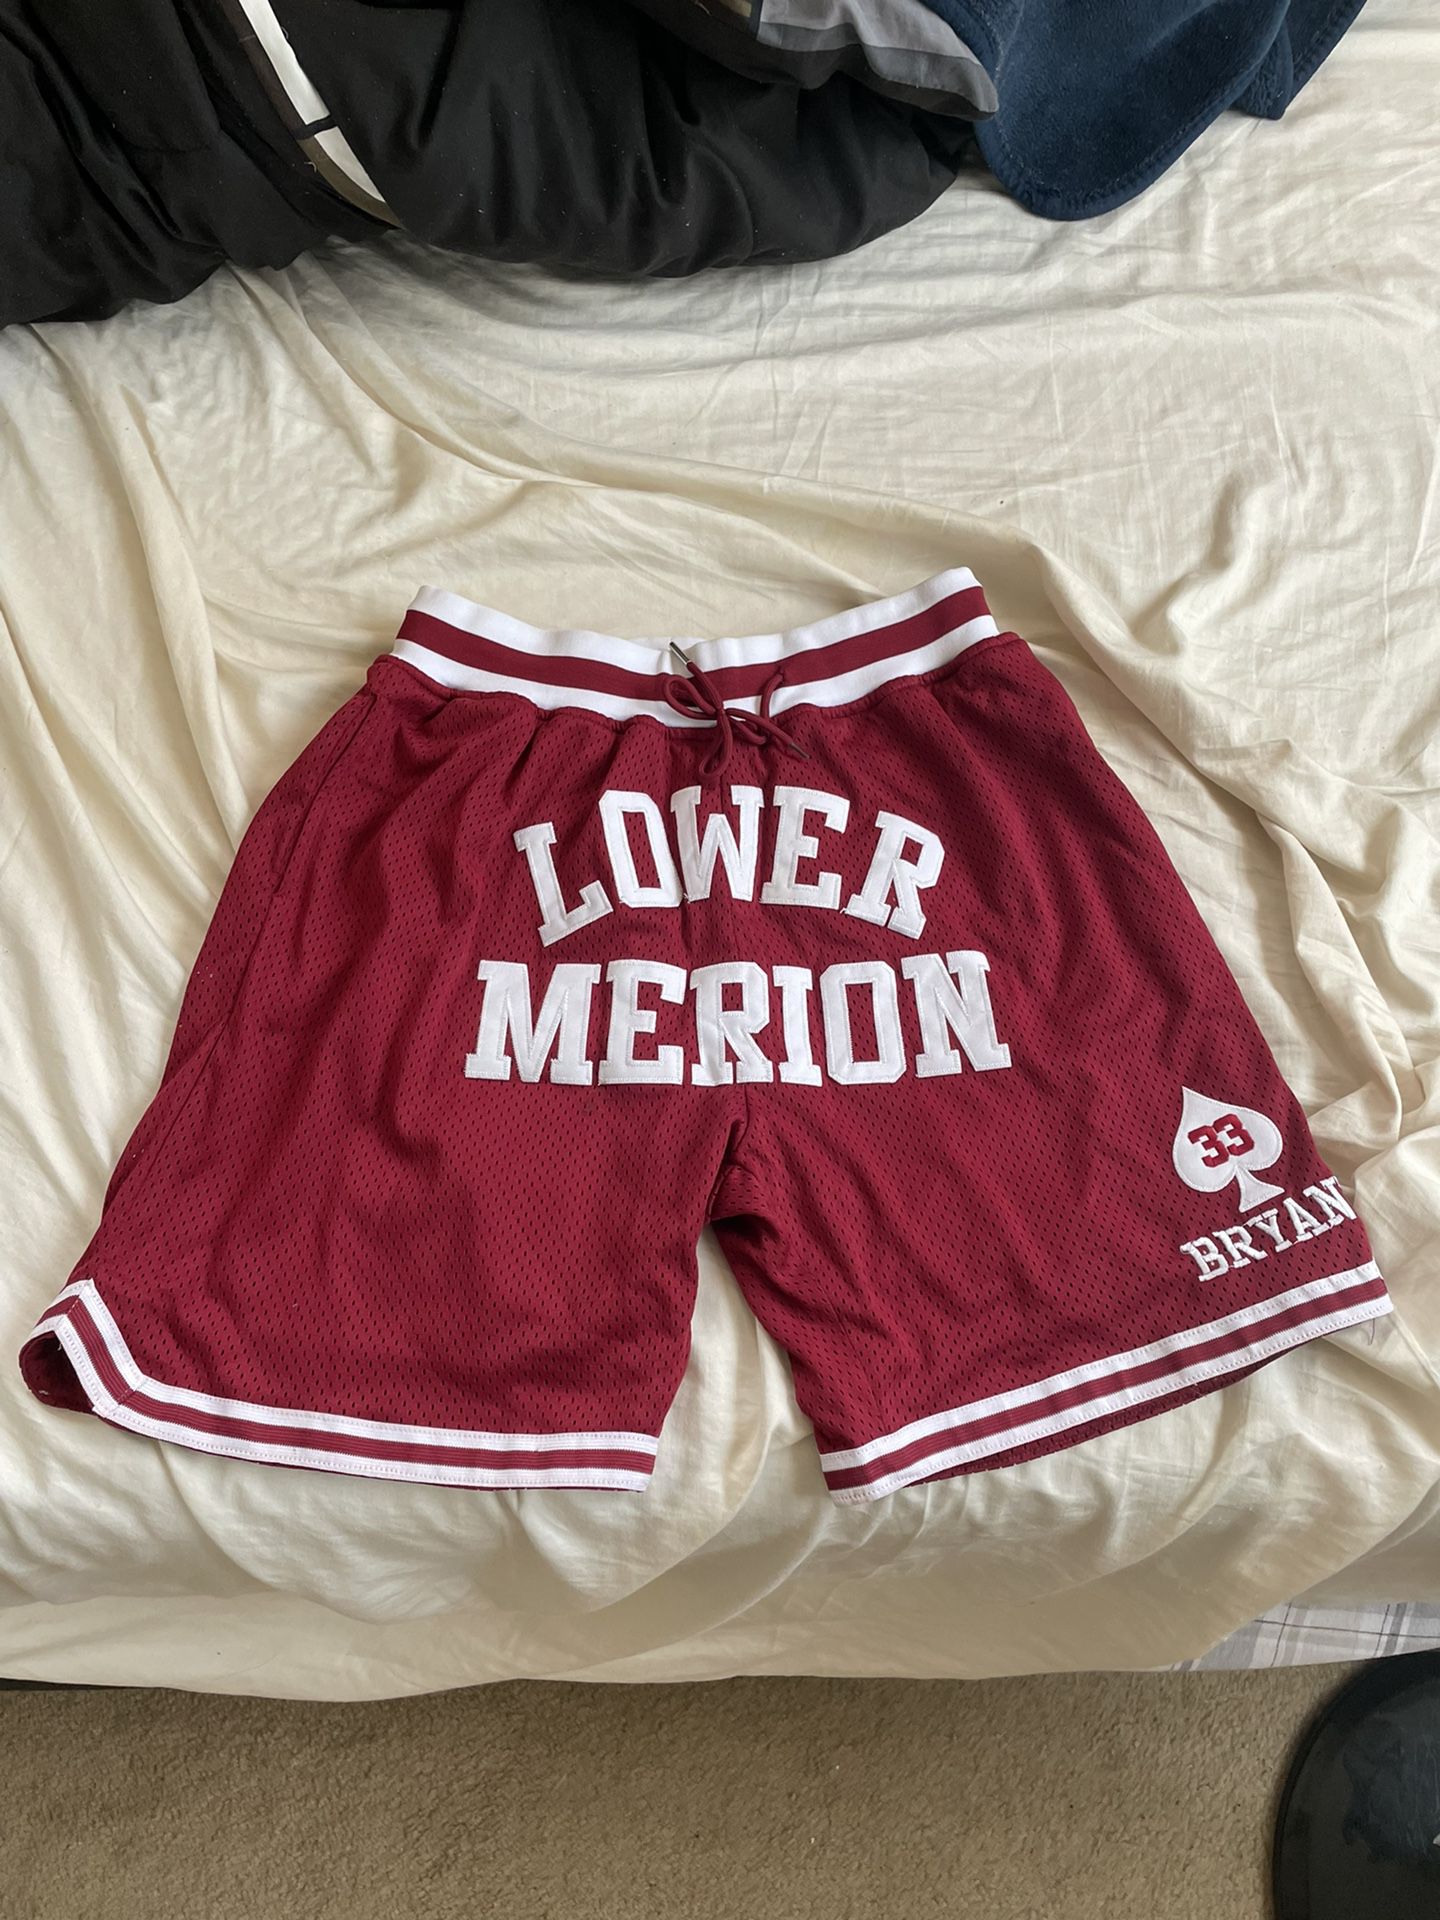 Kobe Bryant Lower Merion High School #33 Authentic Embroidered Basketball  Shorts